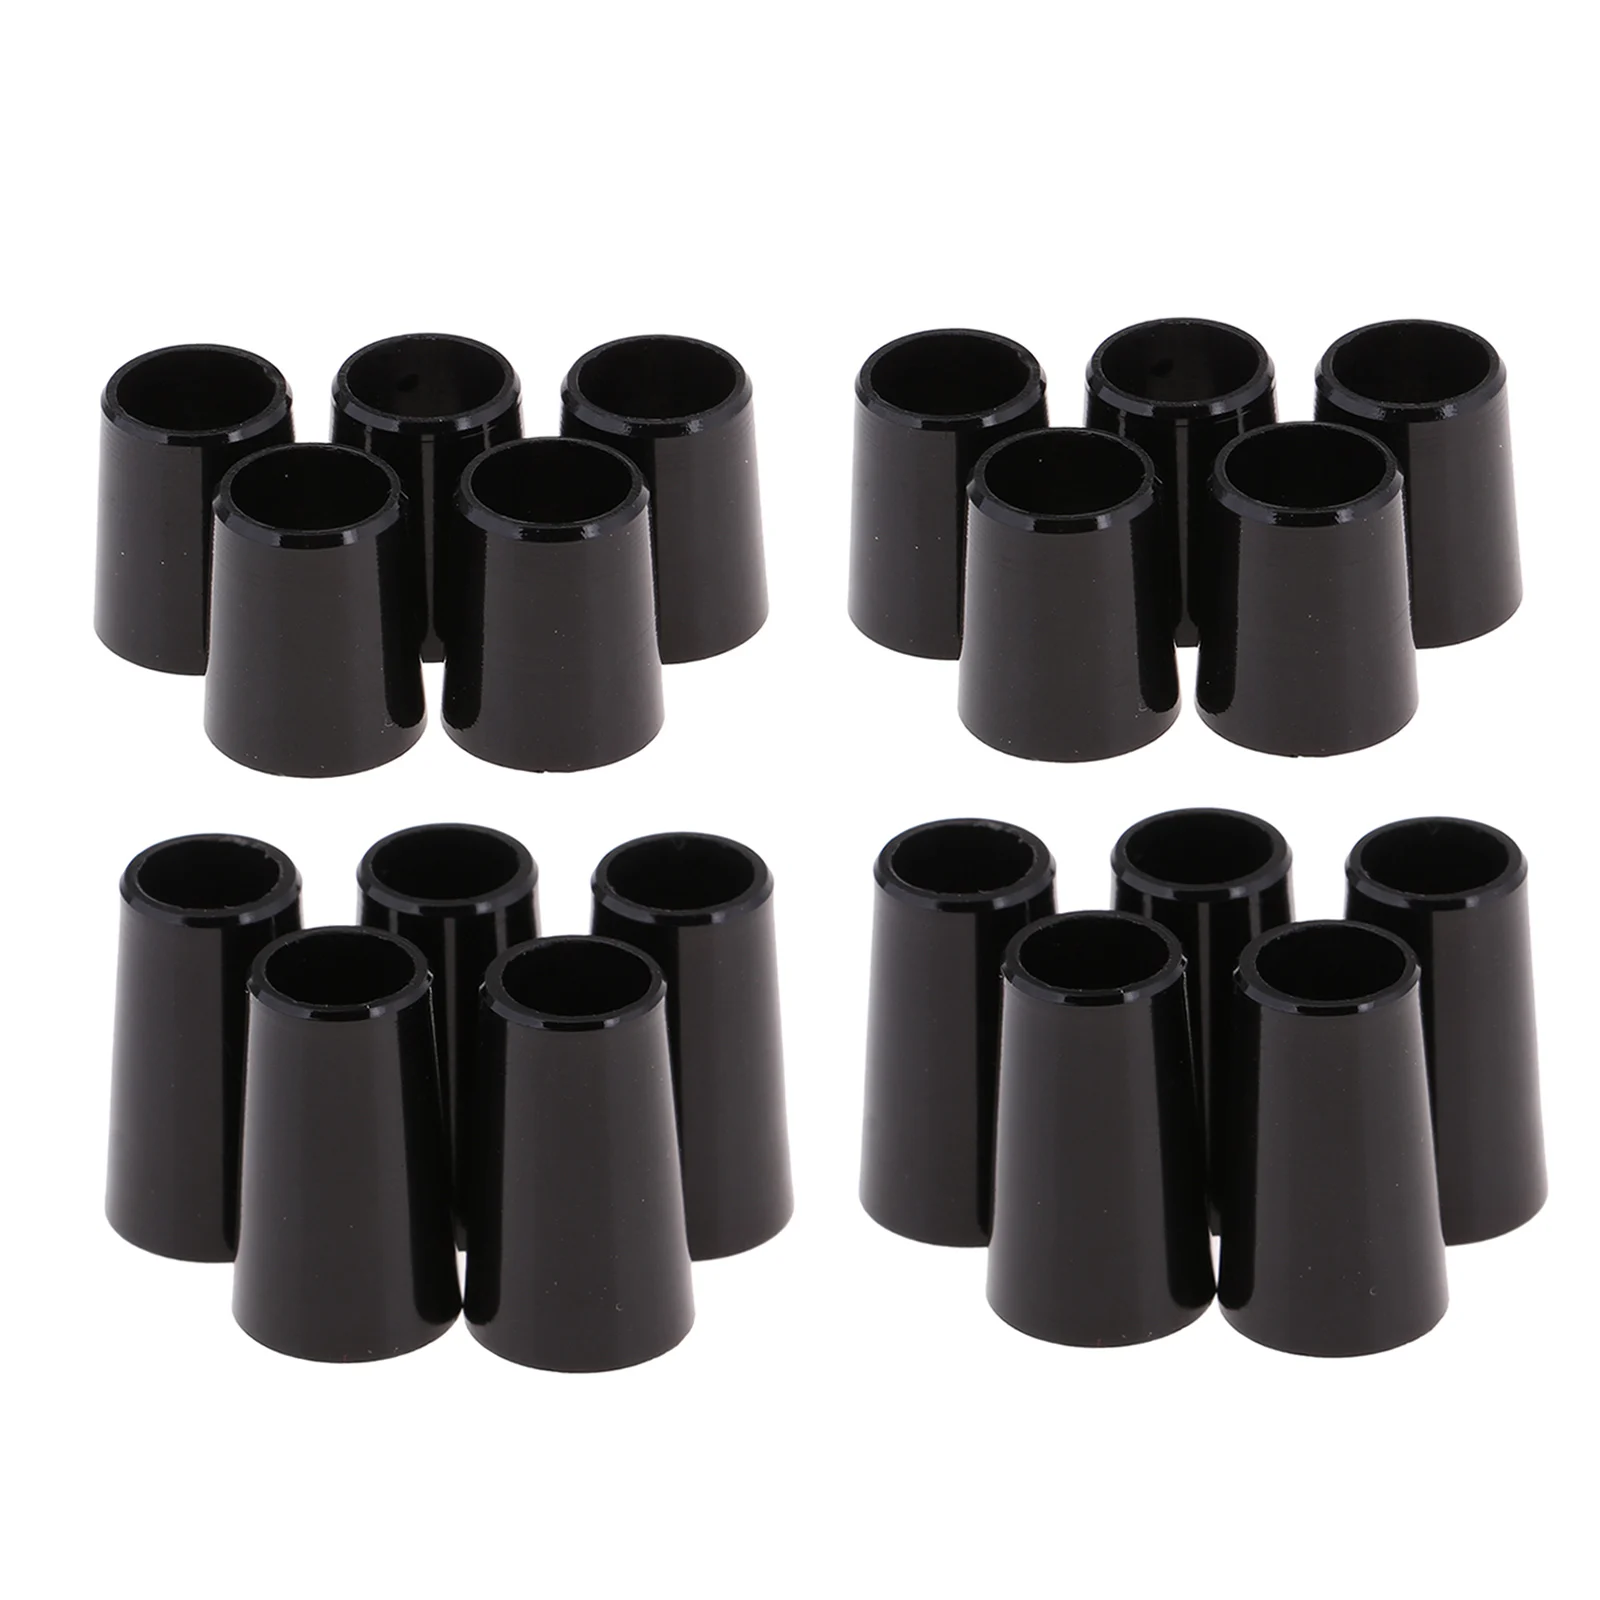 20 Pack .370/.335 Black Golf Ferrules for Irons Wood Shafts Club Accessories